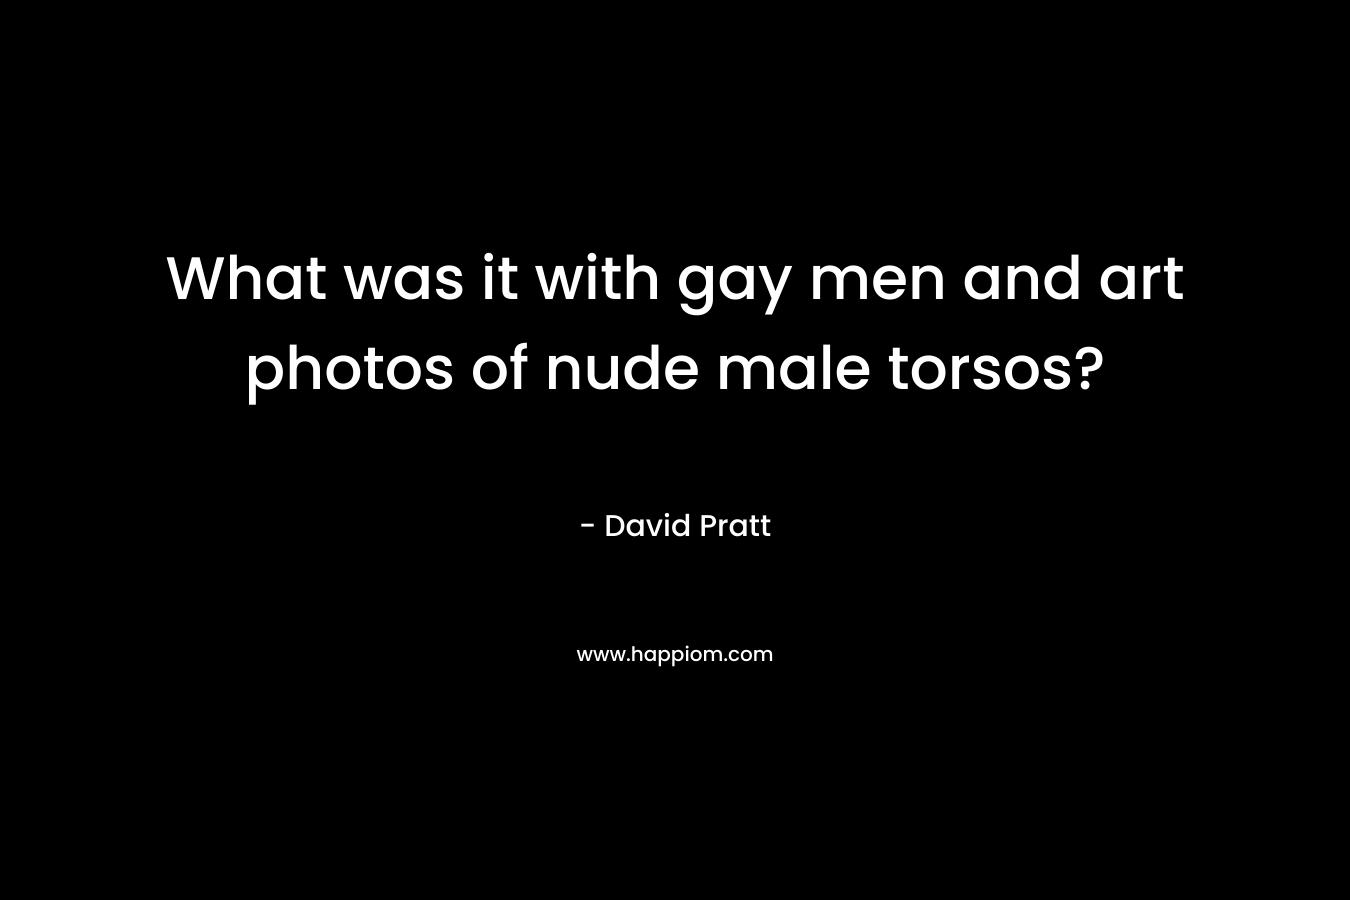 What was it with gay men and art photos of nude male torsos?